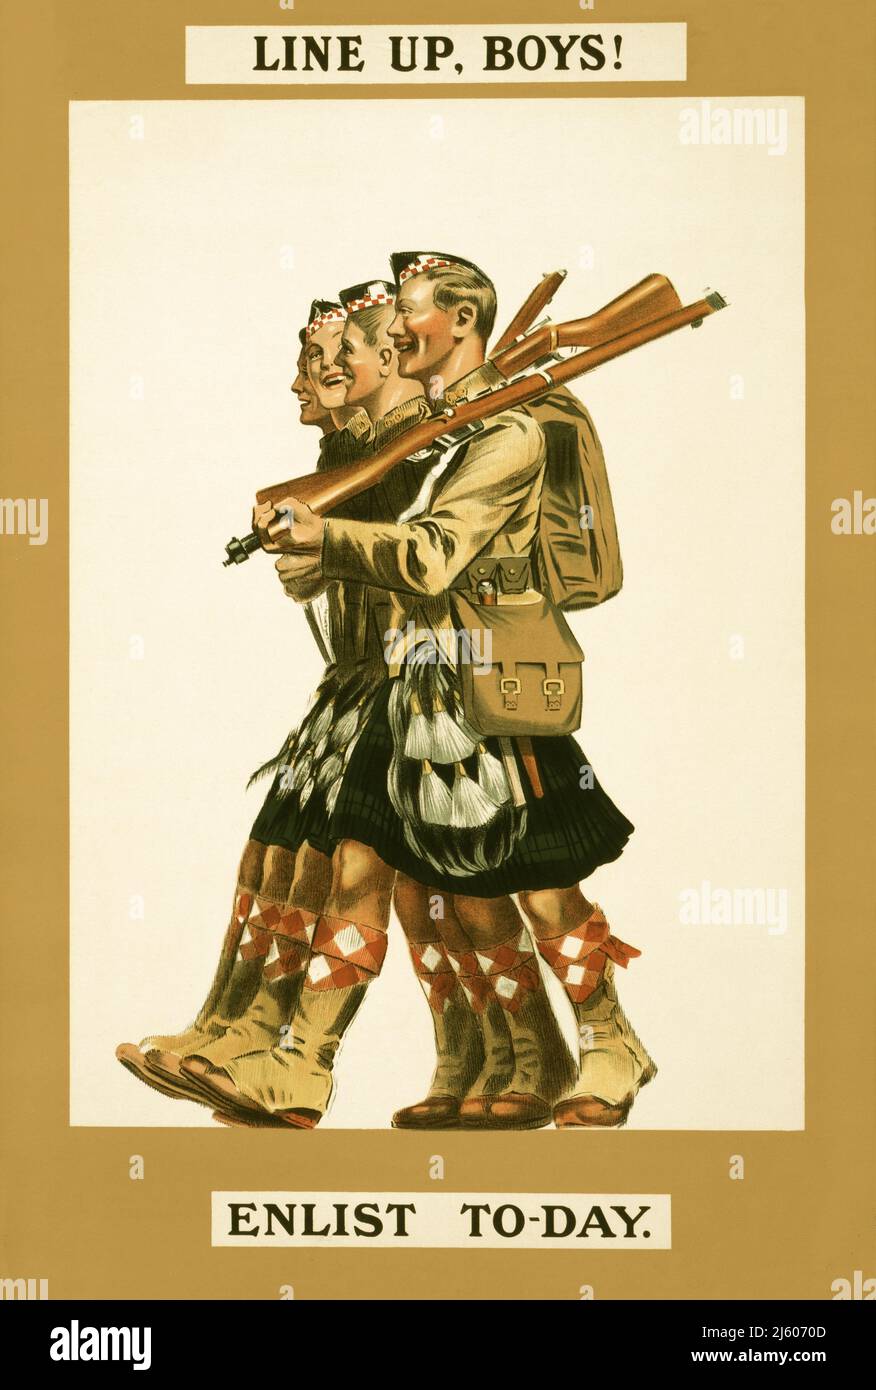 A British advertising recruitment poster from 1915 showing four men in kilts and uniforms, shouldering rifles. Artist Unknown. Stock Photo